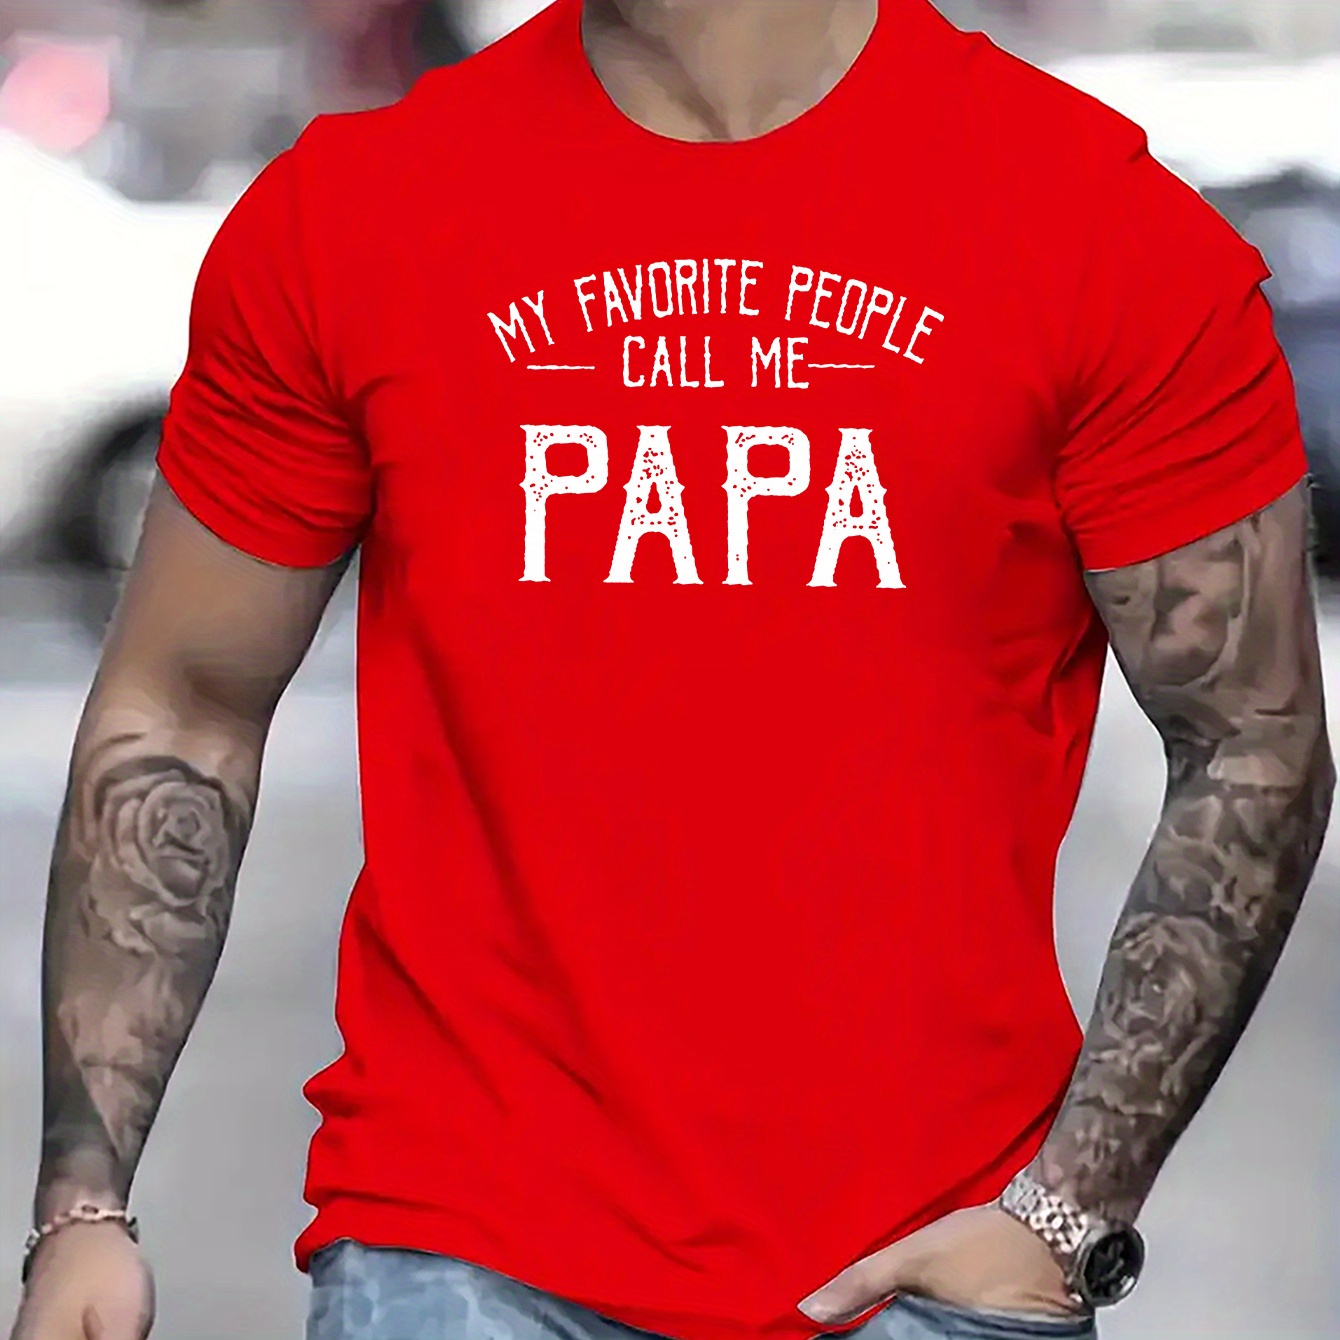 

My Favorite People Call Me Papa Print T Shirt, Tees For Men, Casual Short Sleeve T-shirt For Summer